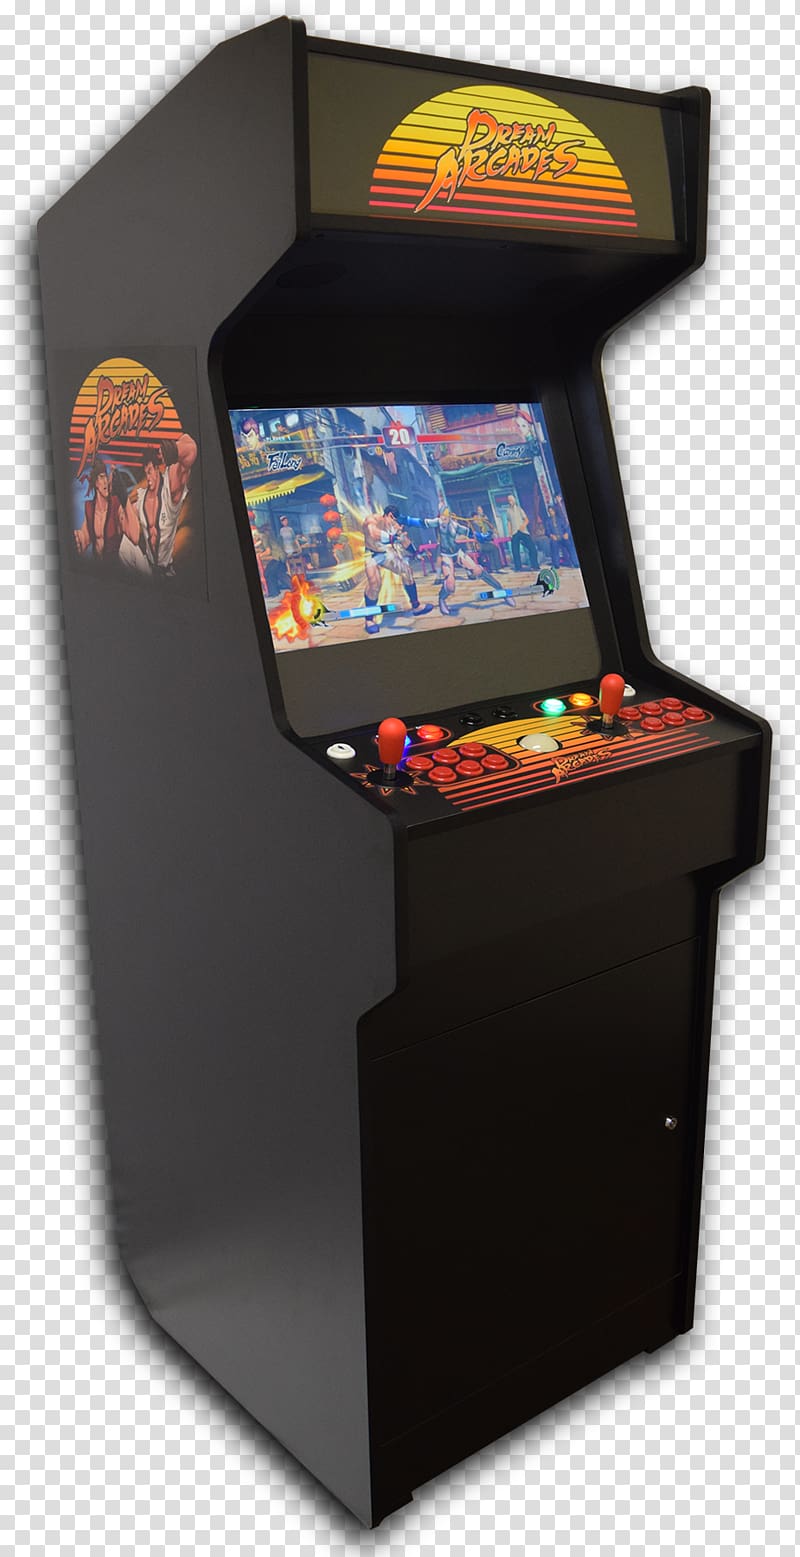 Arcade cabinet Golden age of arcade video games Street Fighter Virtua Fighter 5 Arcade game, Street Fighter transparent background PNG clipart